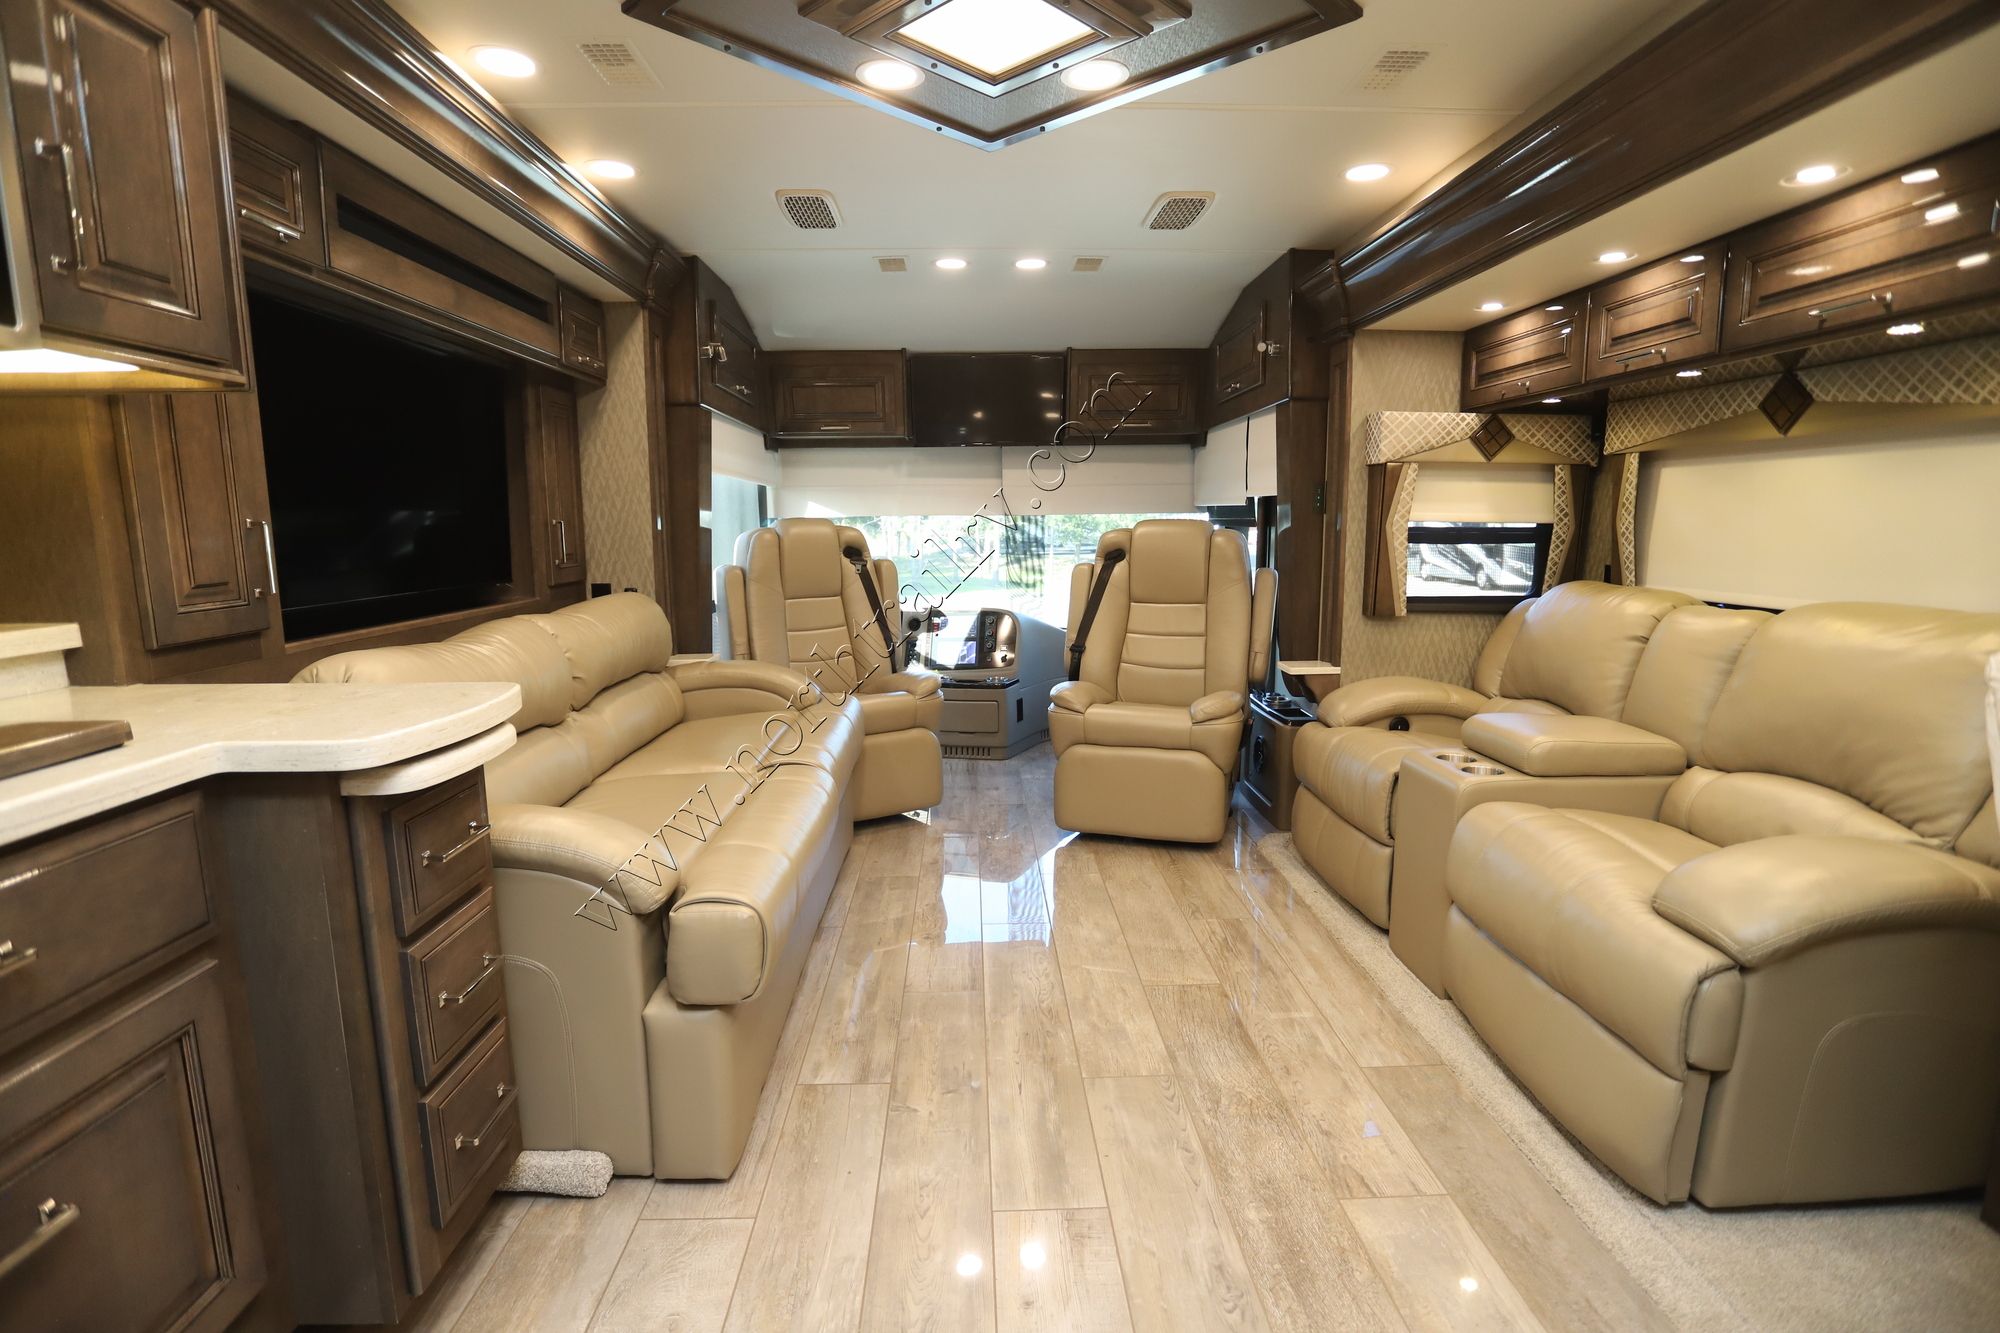 Used 2020 Entegra Anthem 44F Class A  For Sale